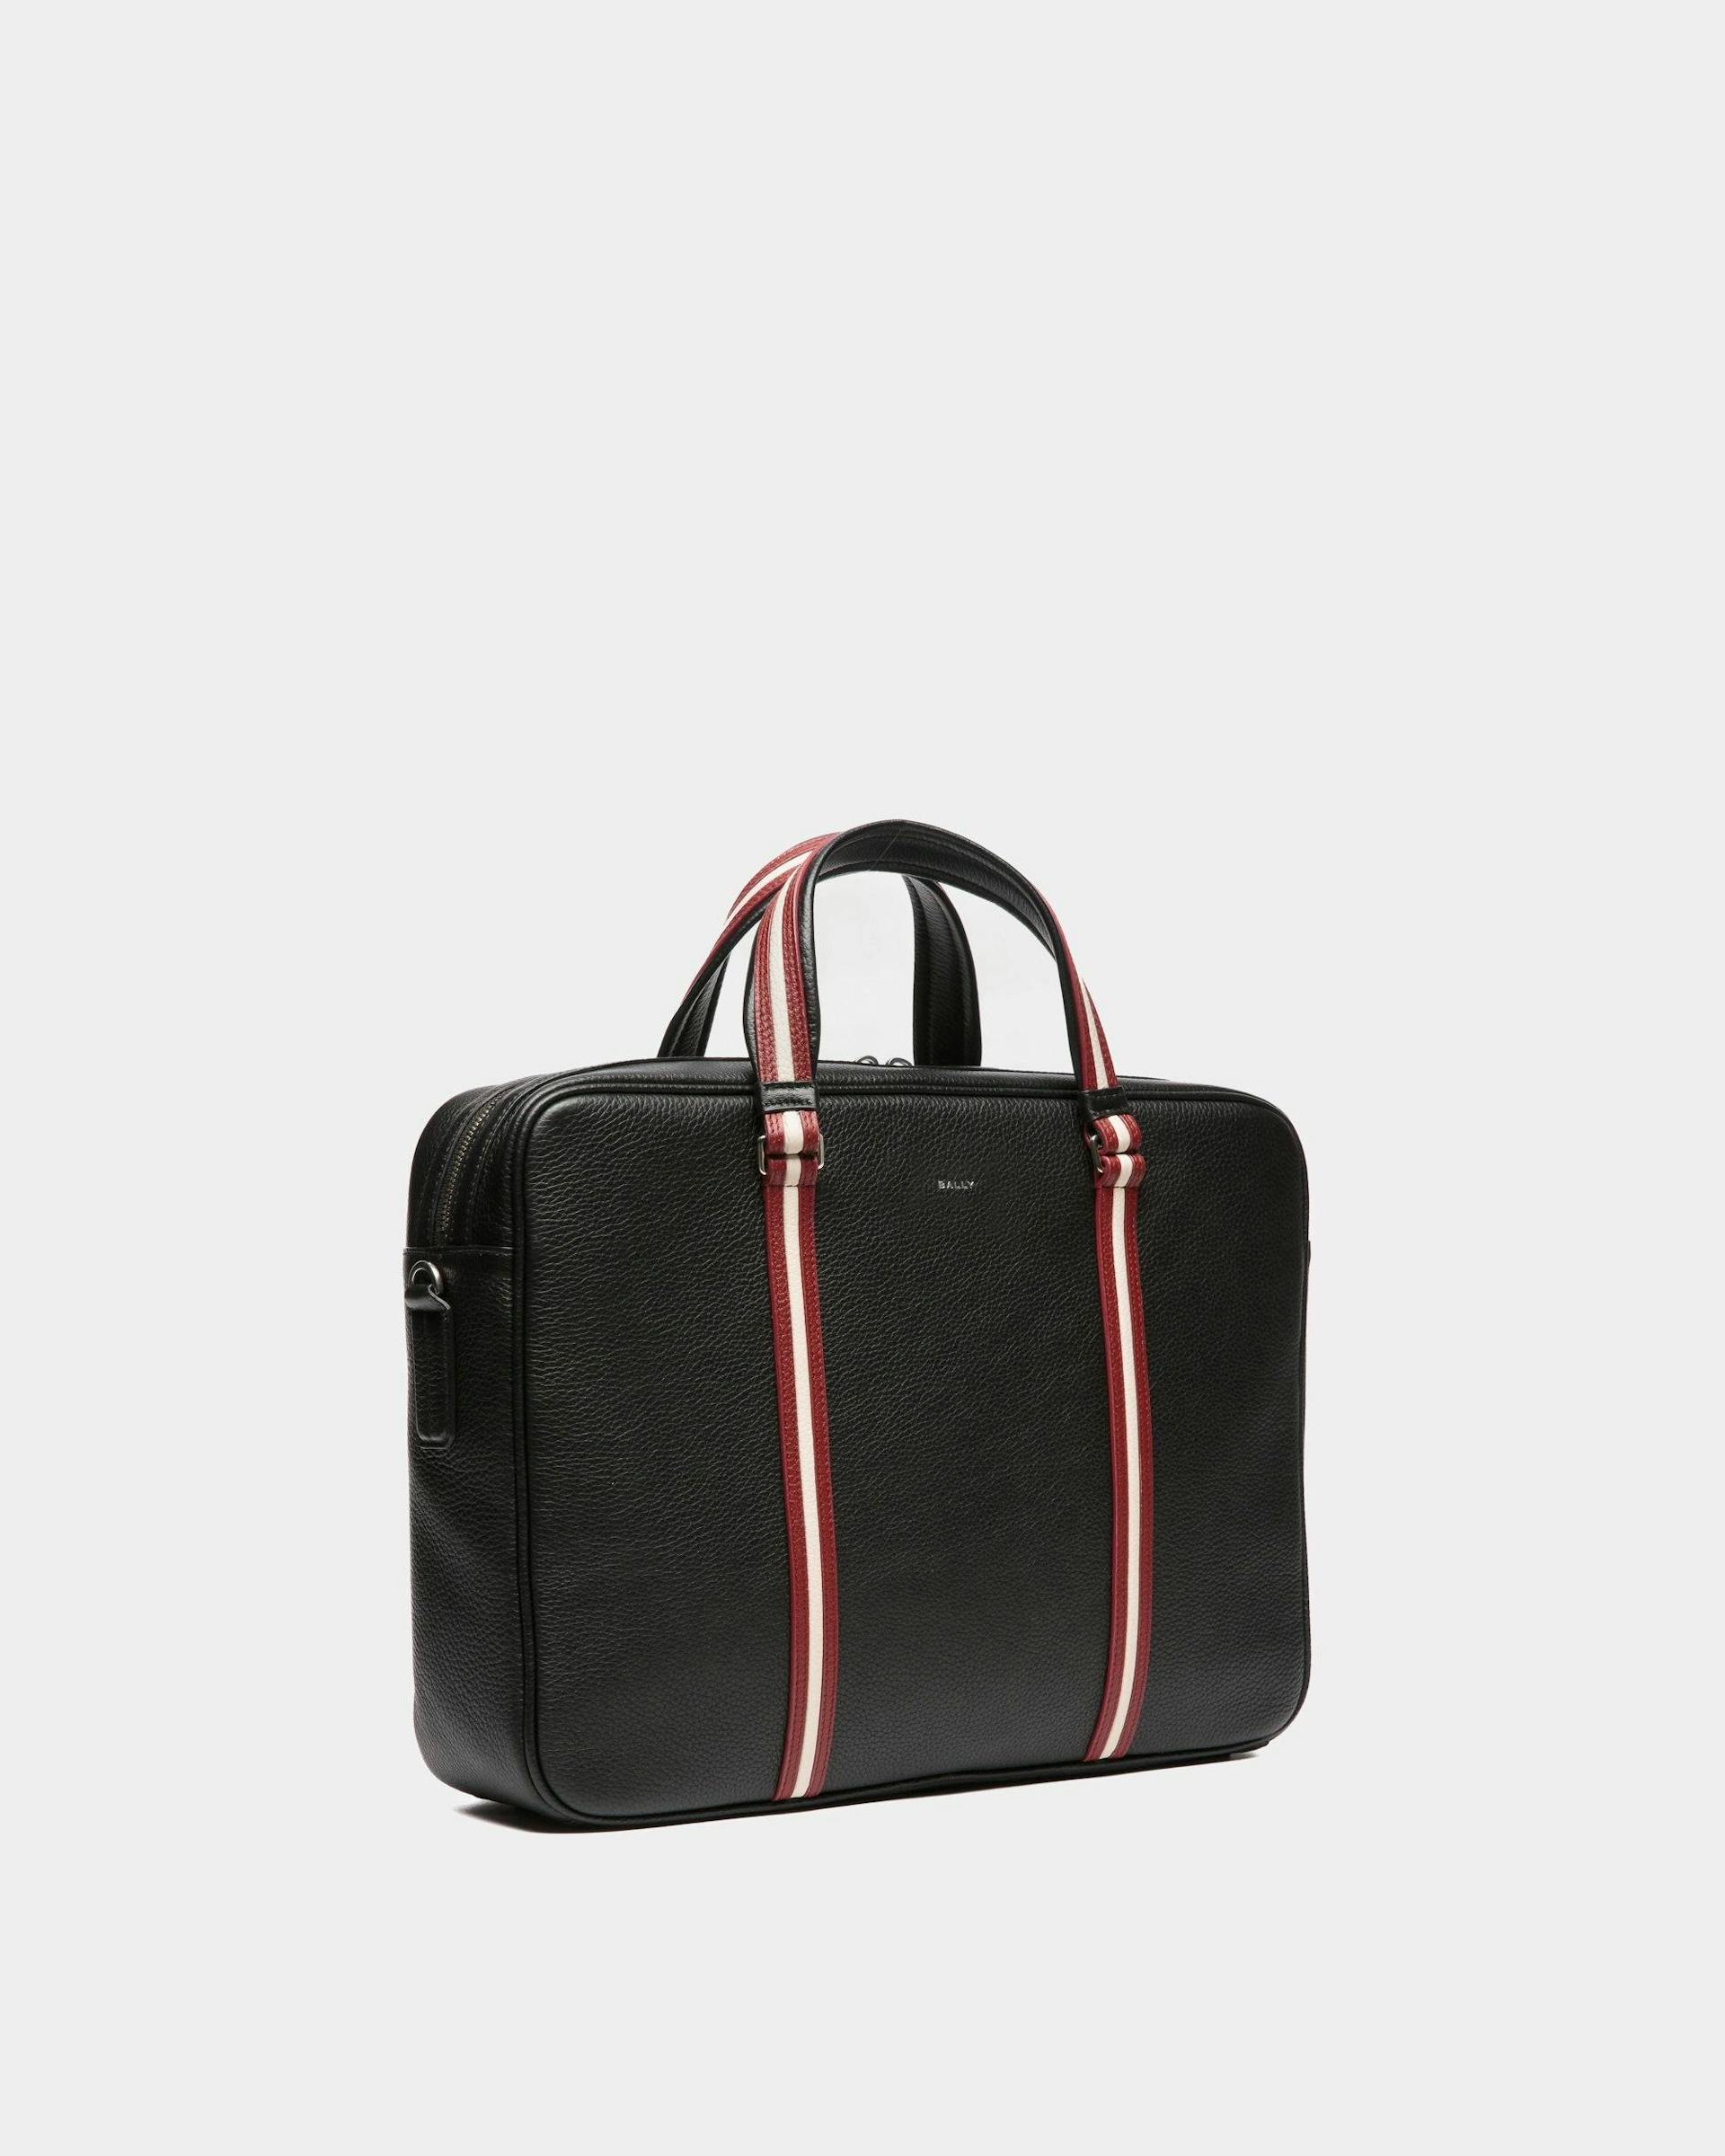 Men's Code Briefcase In Black Grained Leather | Bally | Still Life 3/4 Front